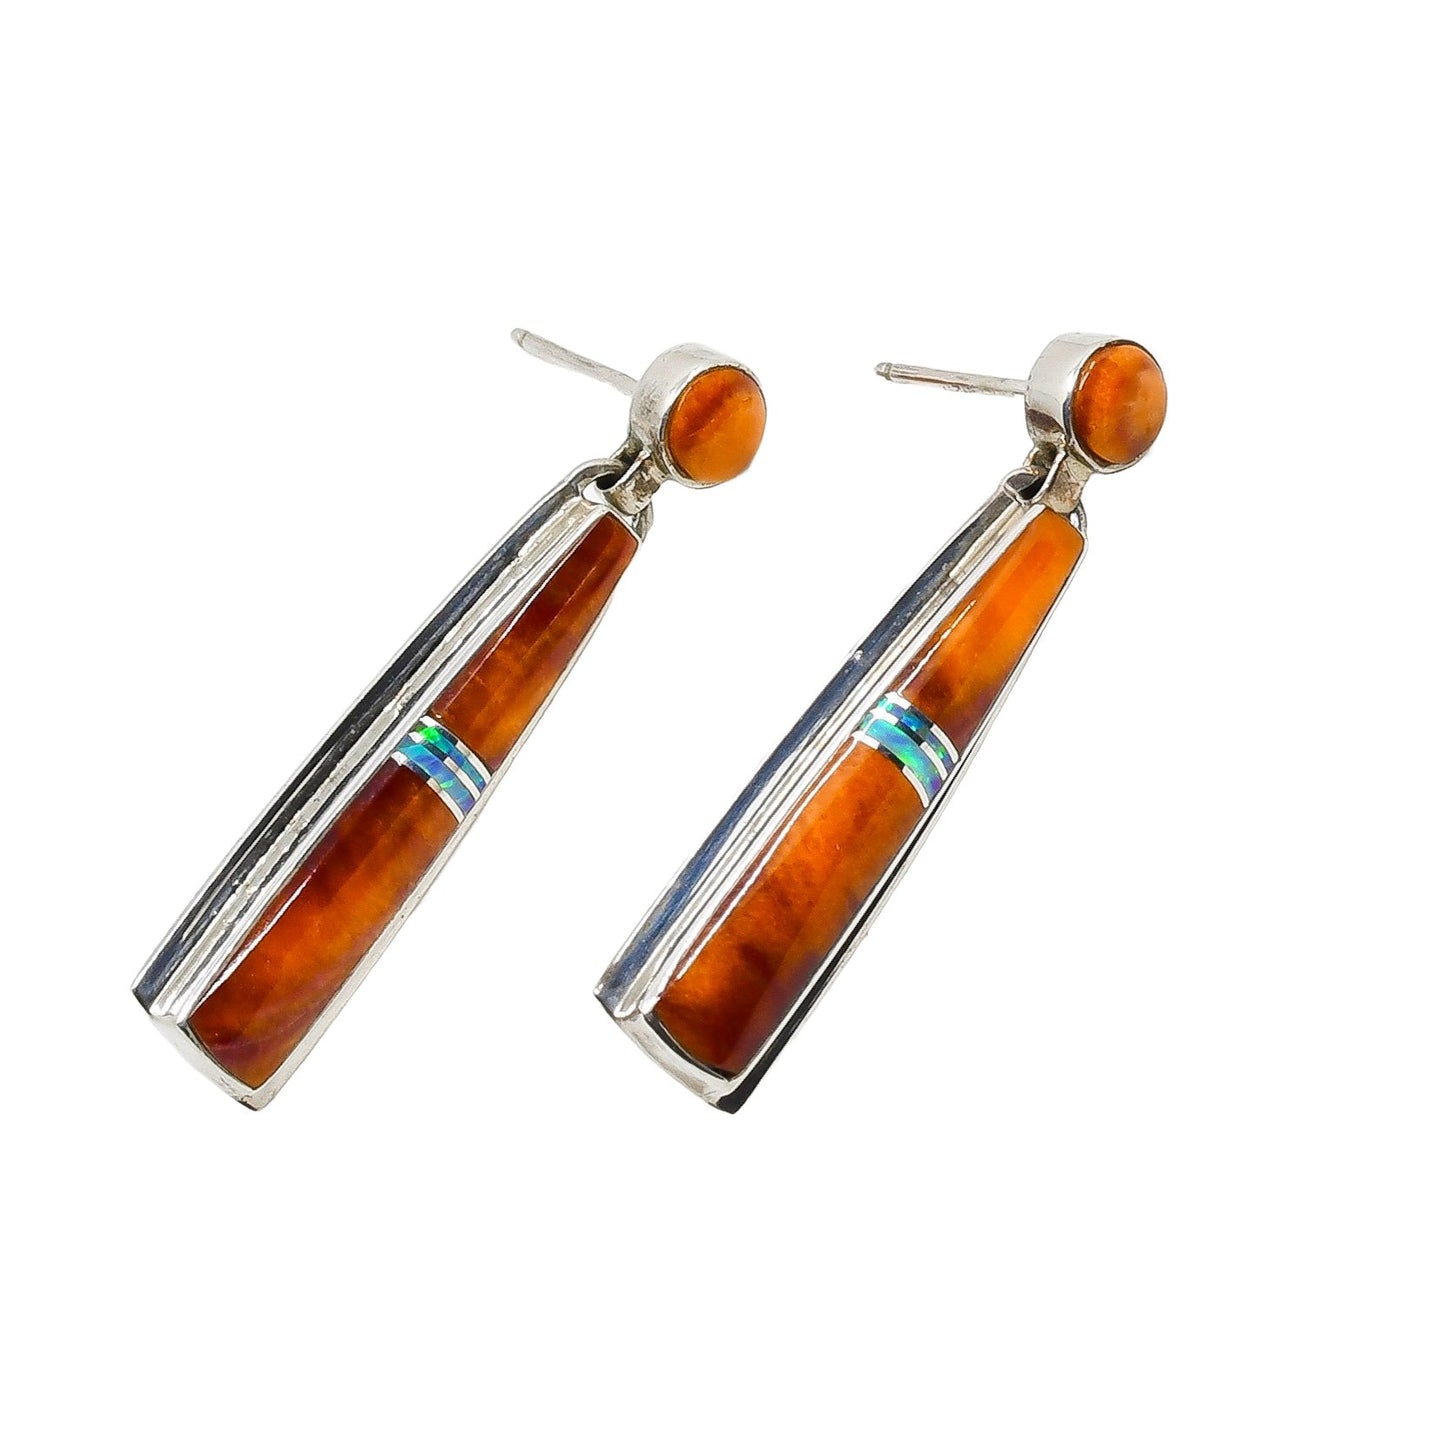 Contemporary Navajo Mosaic Inlay Dangle Earrings of Spiny Oyster By Cathy Webster - Turquoise & Tufa